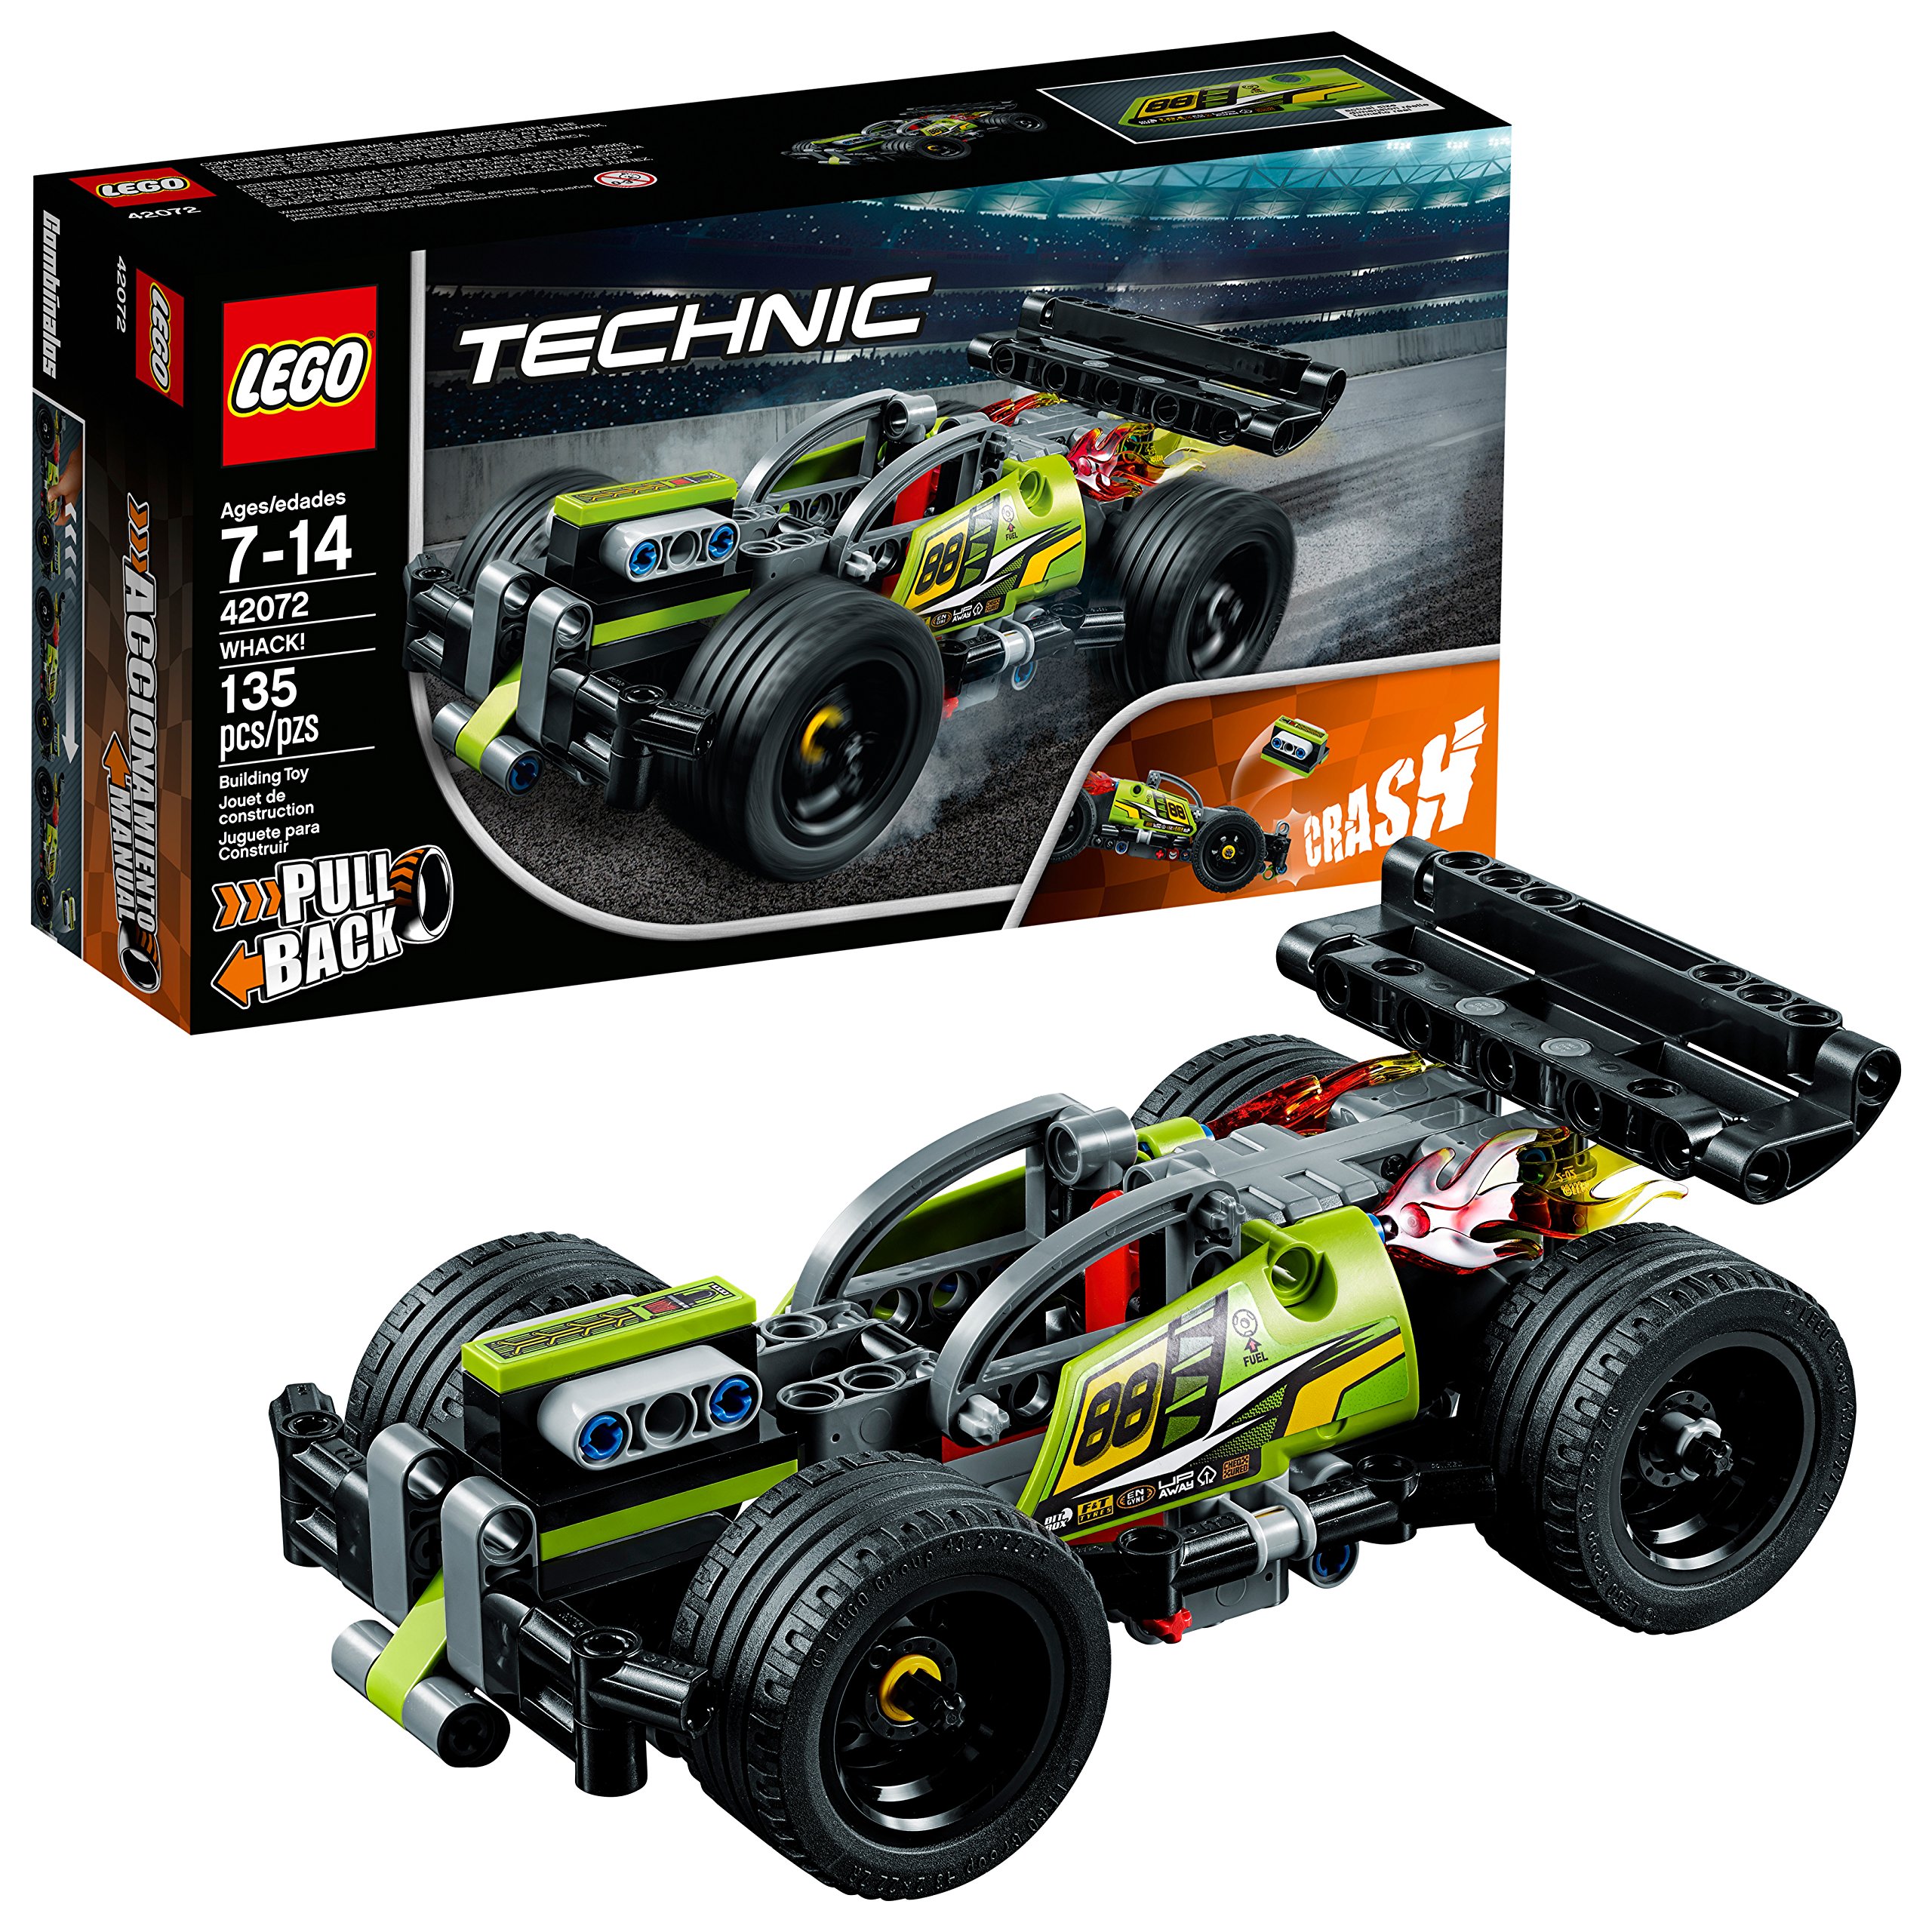 LEGO Technic WHACK! 42072 Building Kit with Pull Back Toy Stunt Car, Popular Girls and Boys Engineering Toy for Creative Play (135 Pieces)